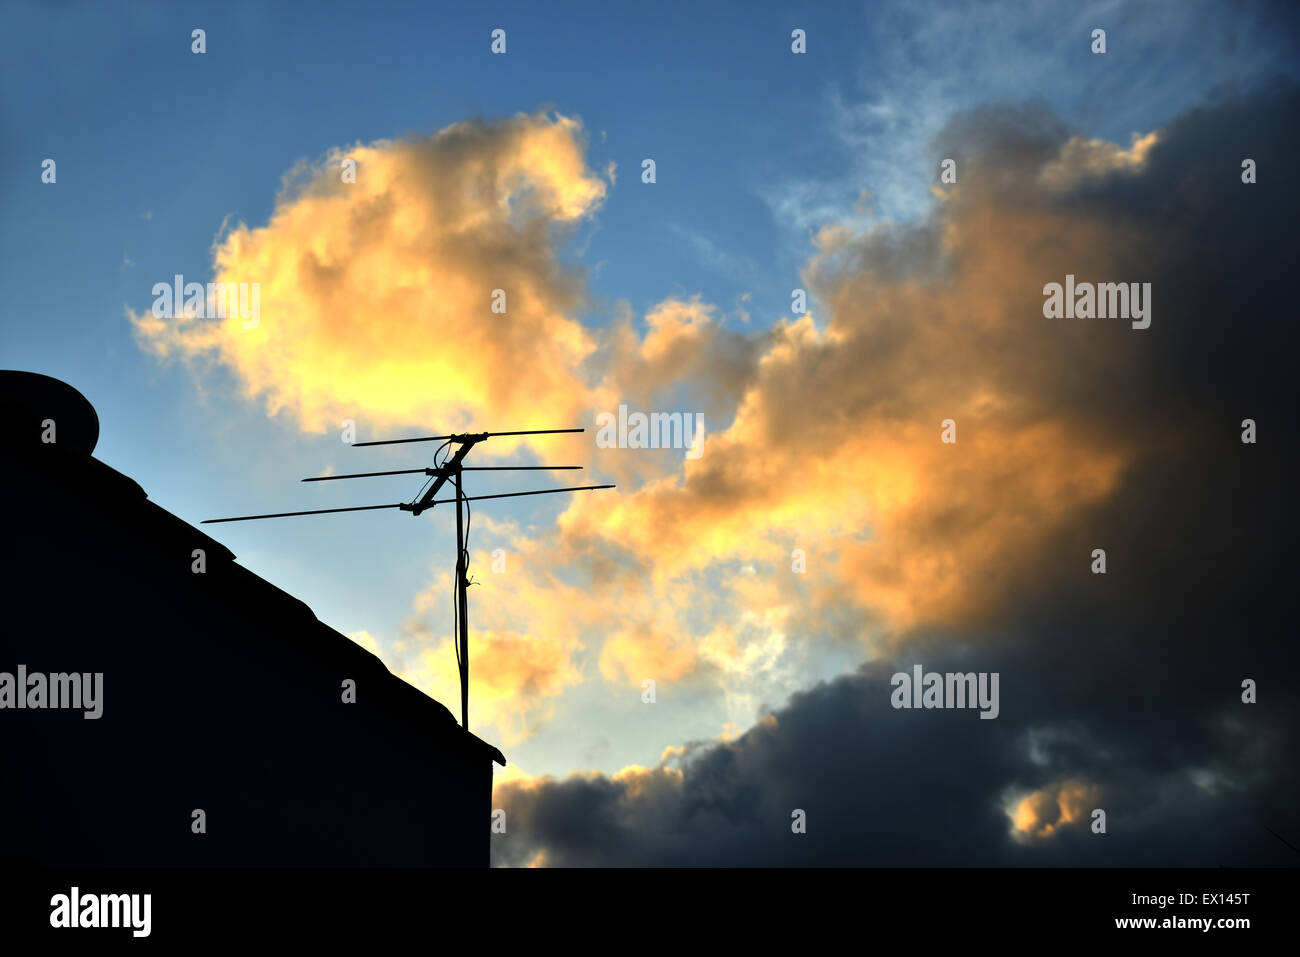 Silhouette image of an old analog roof tv antenna with a sunset background Stock Photo